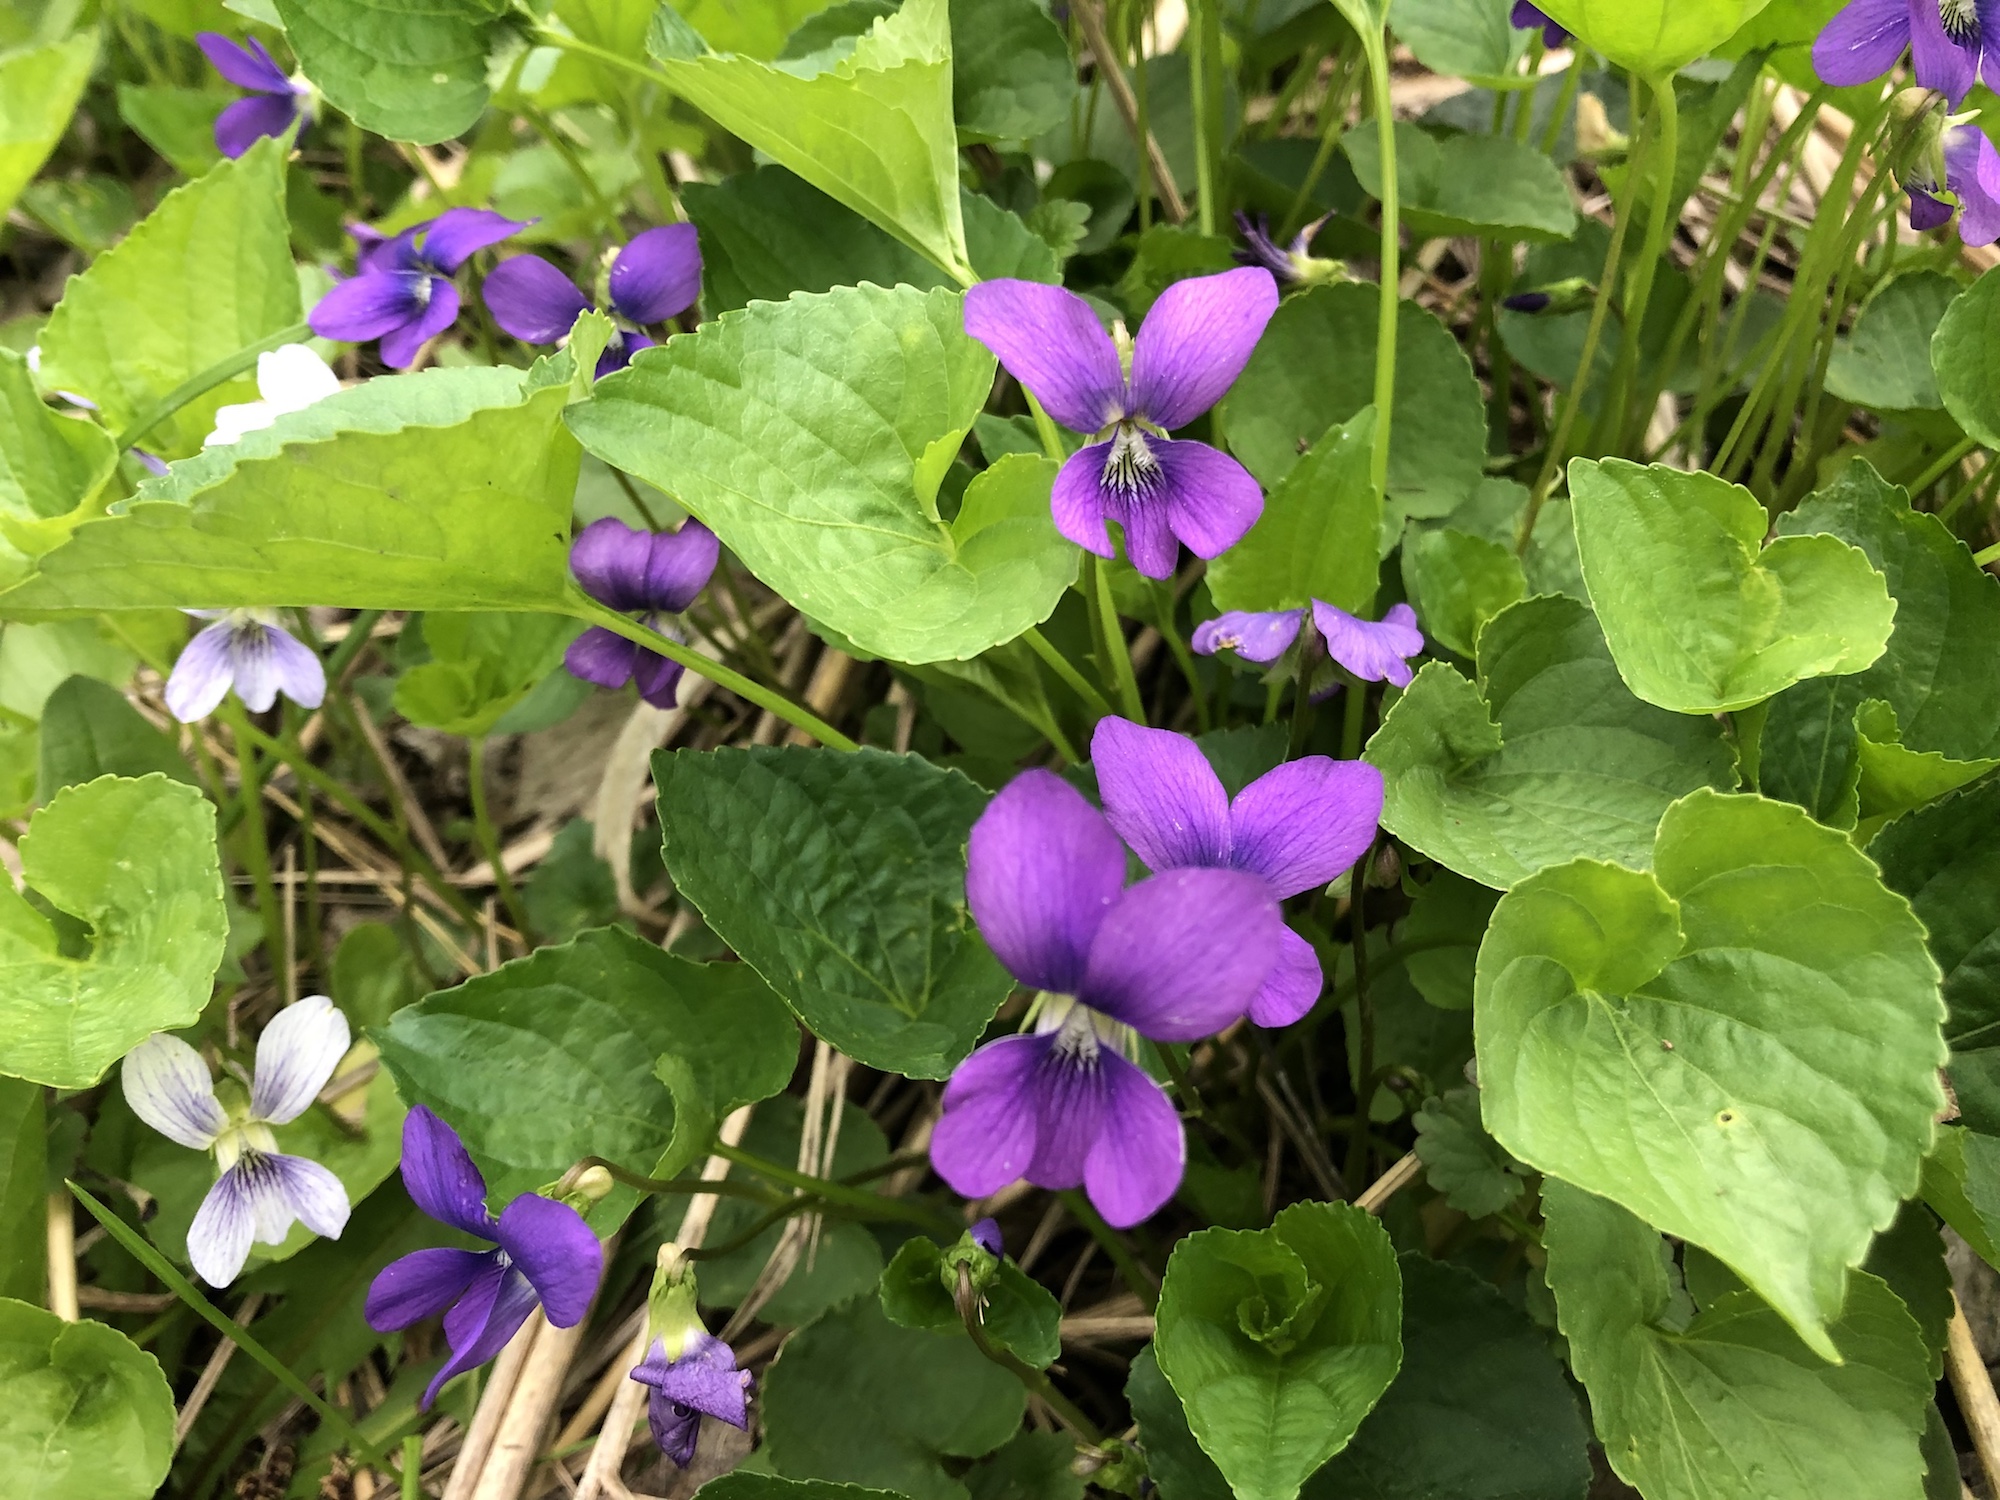 Wood Violets near Council Ring, the Oak Savanna and the Duck Pond on May 17, 2019.